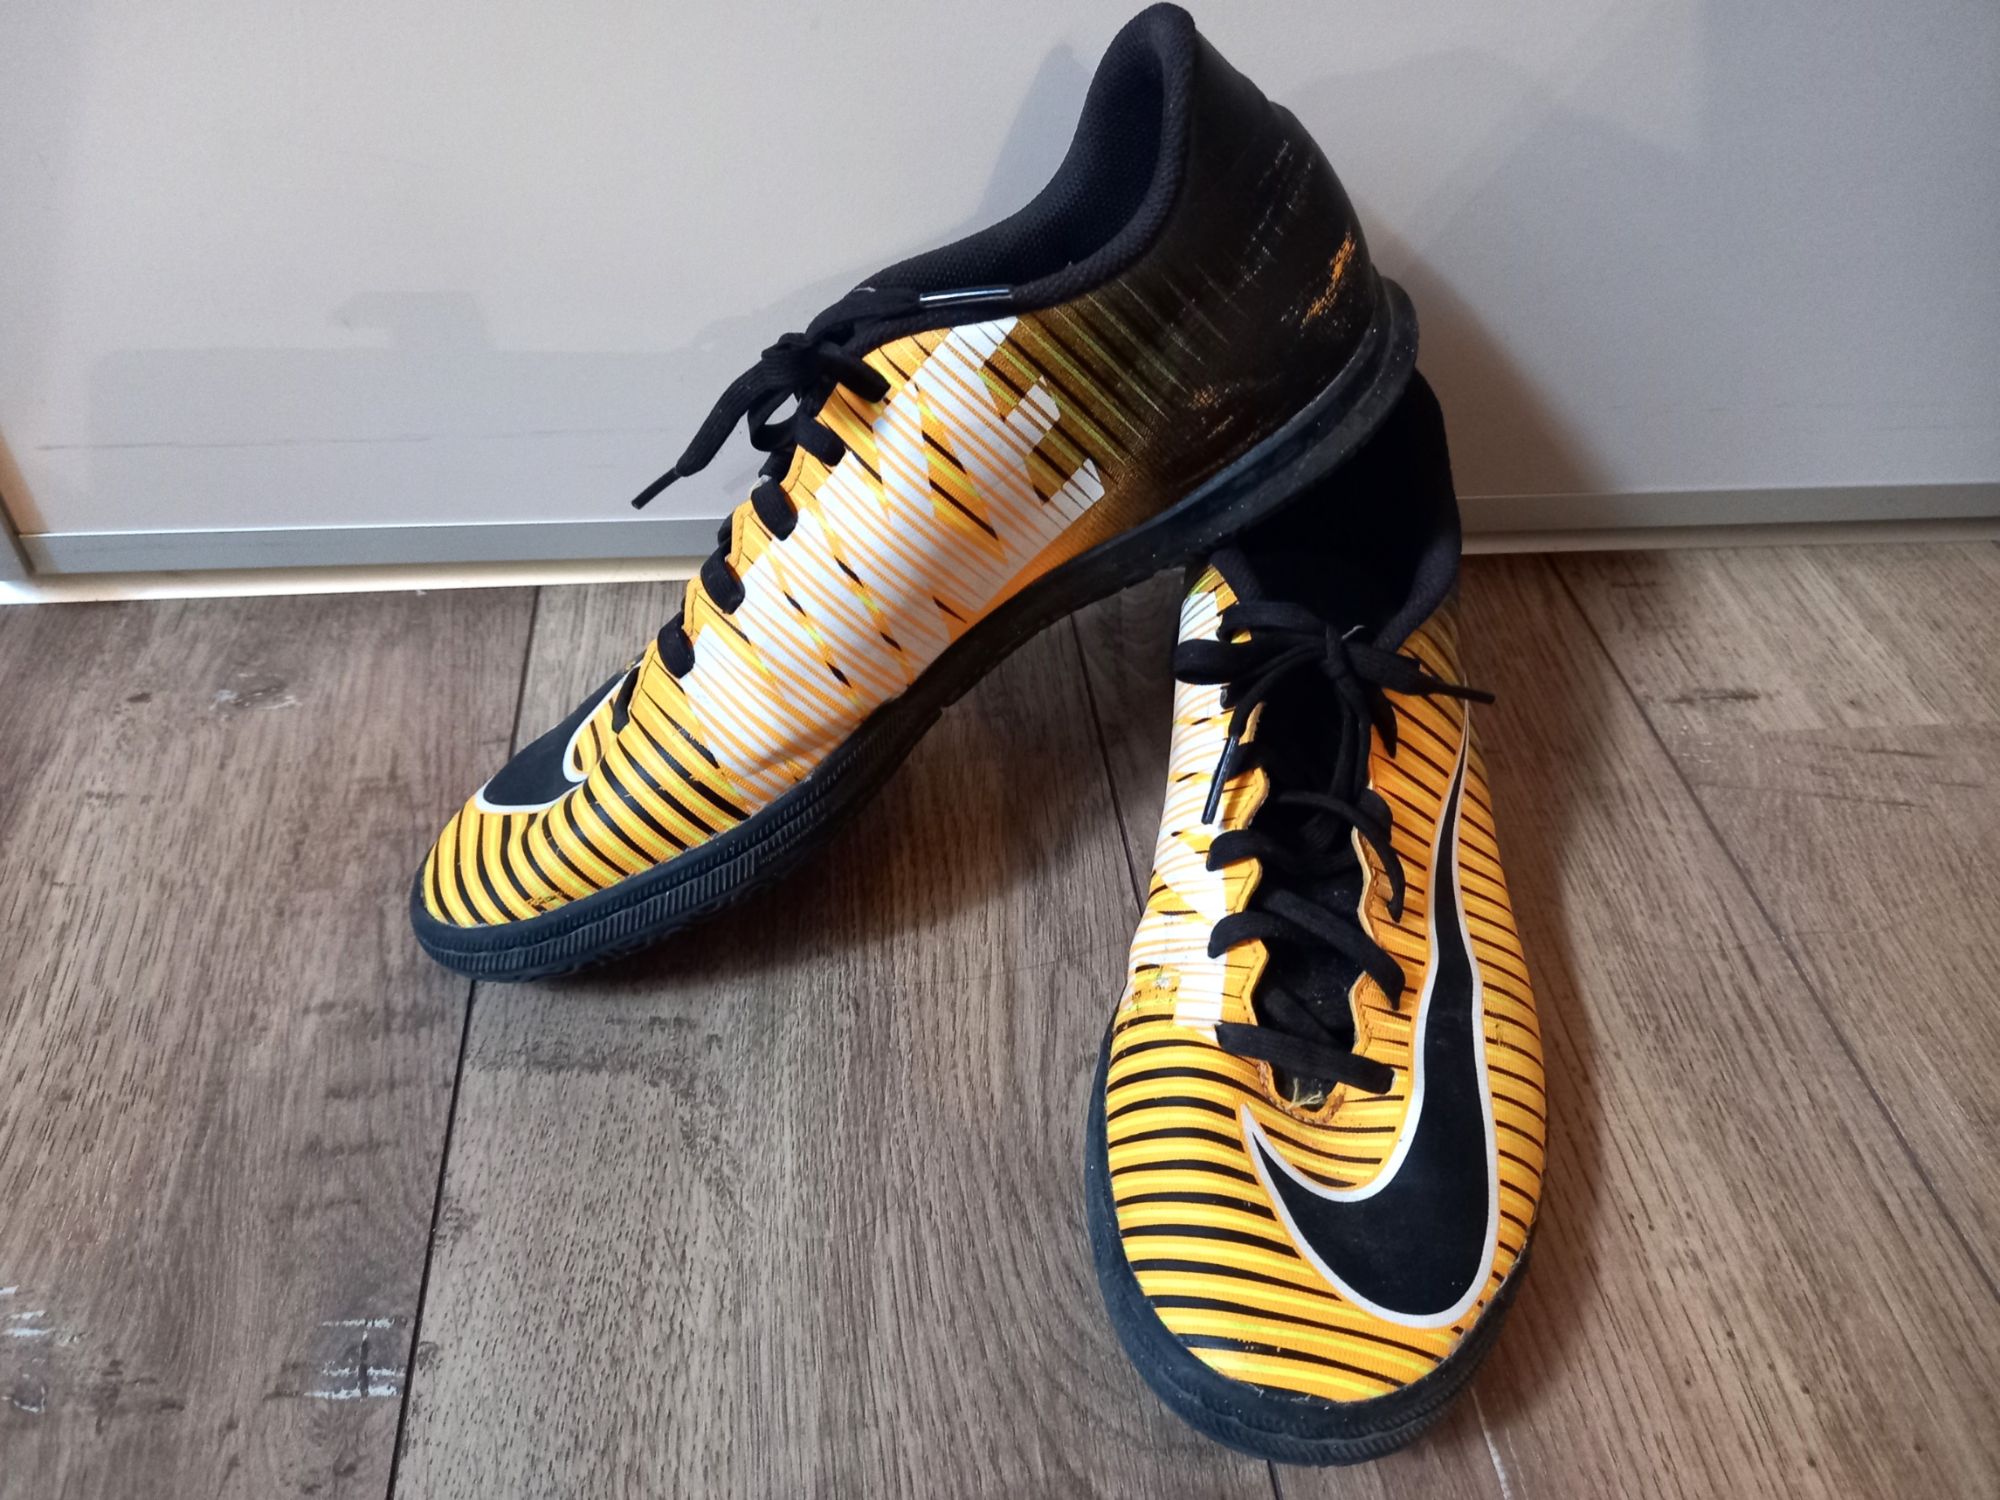 Chaussures Futsal Homme